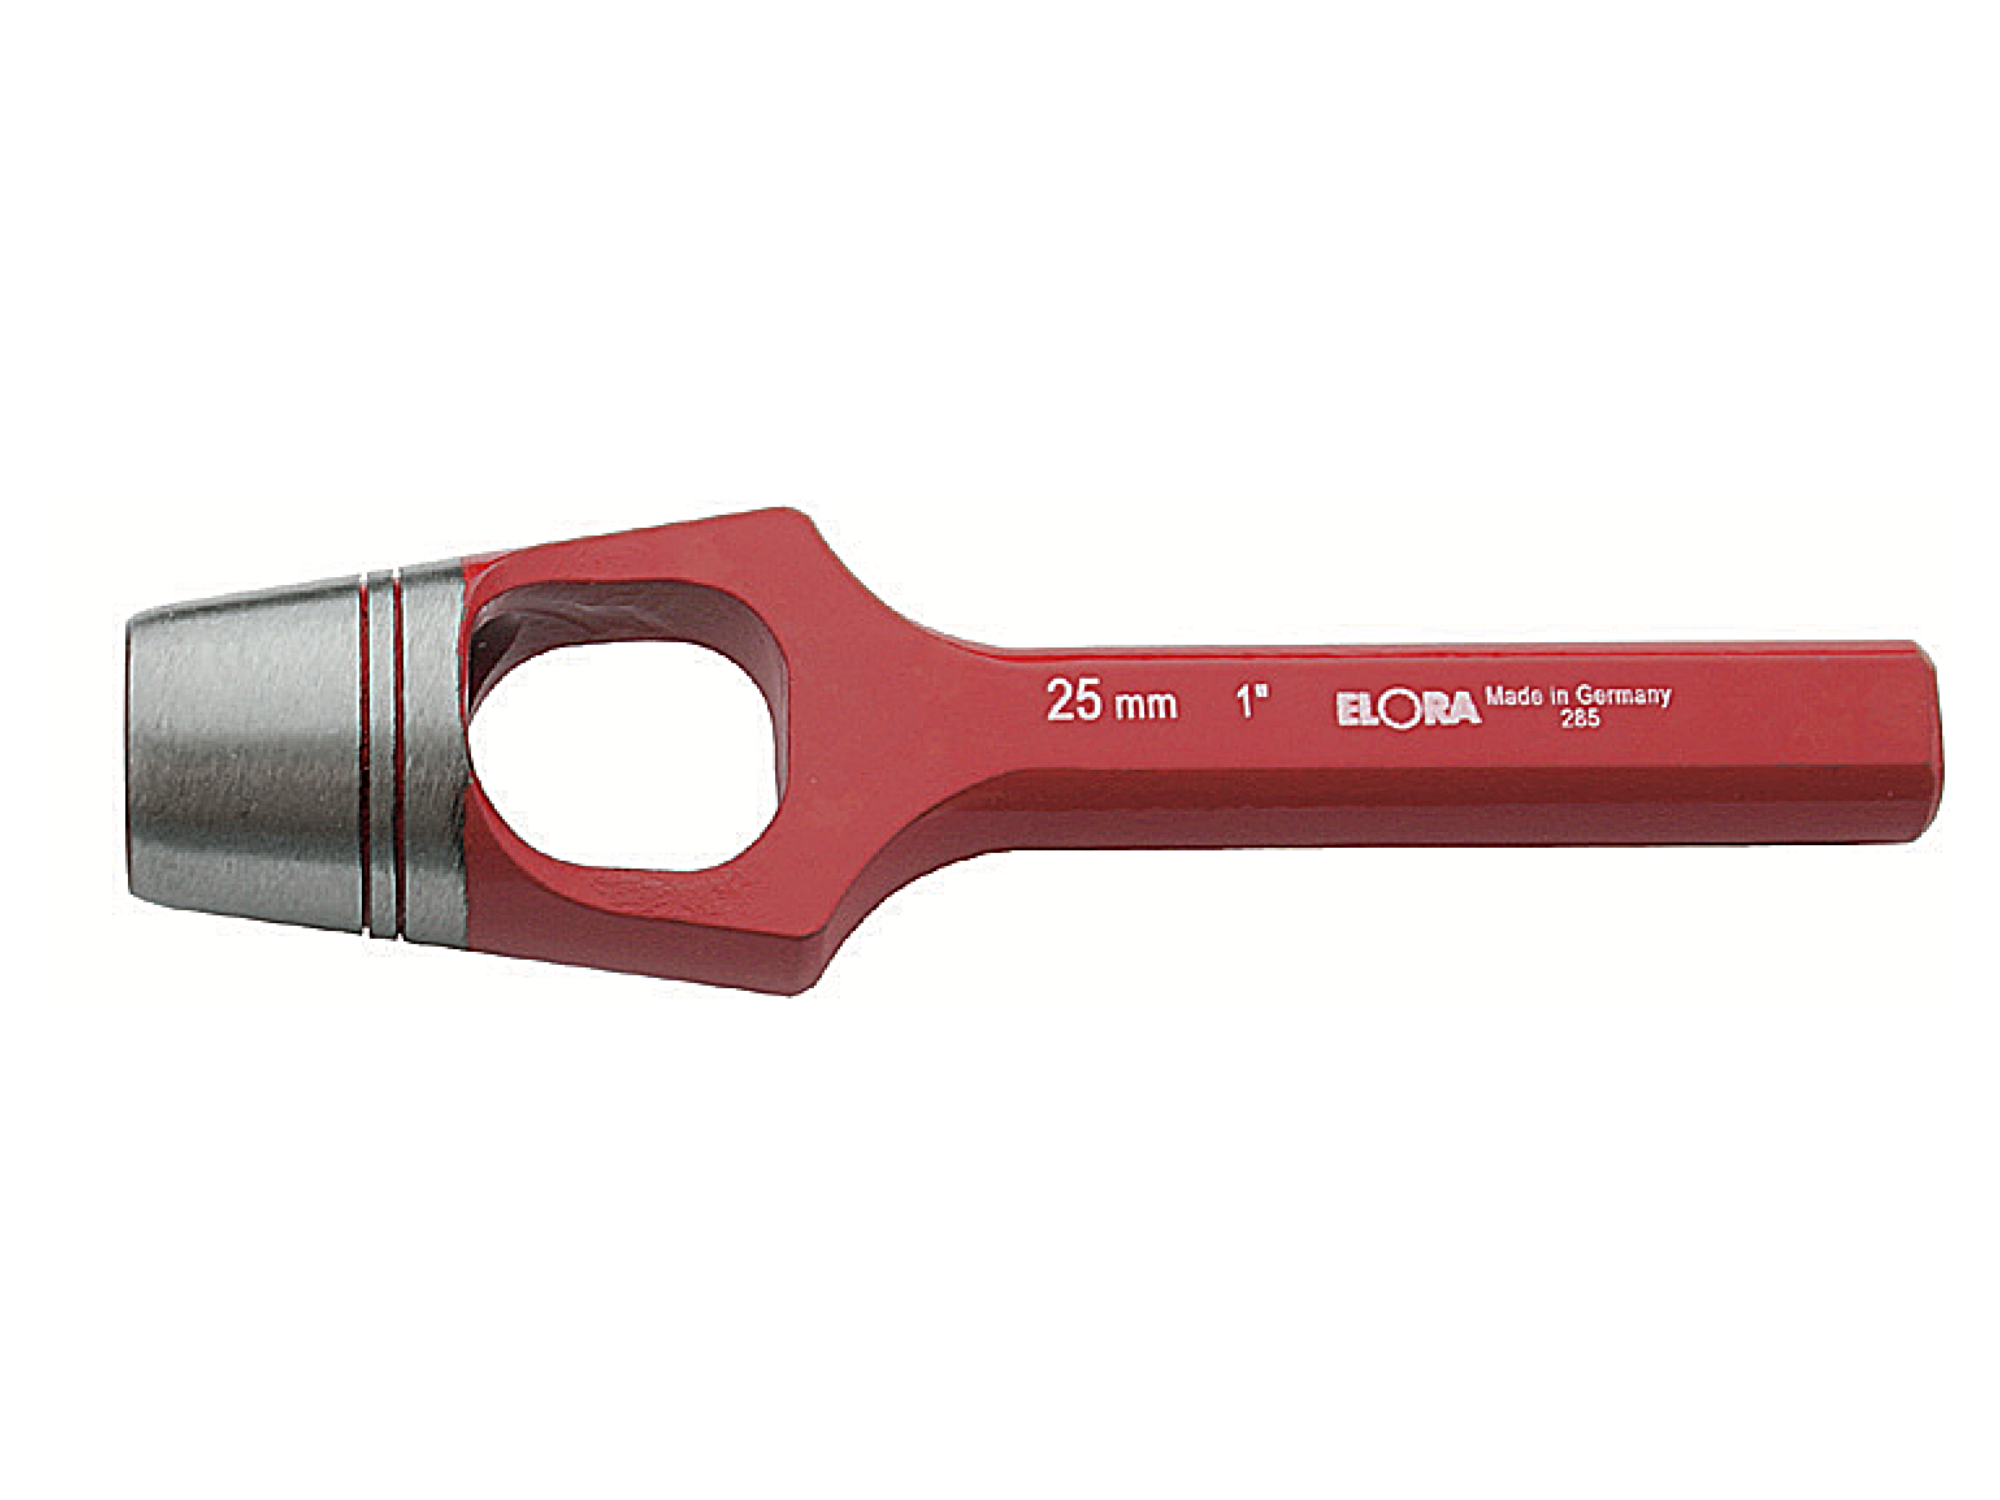 ELORA 285 Wad Punch Shaft Red (ELORA Tools) - Premium Wad Punch from ELORA - Shop now at Yew Aik.